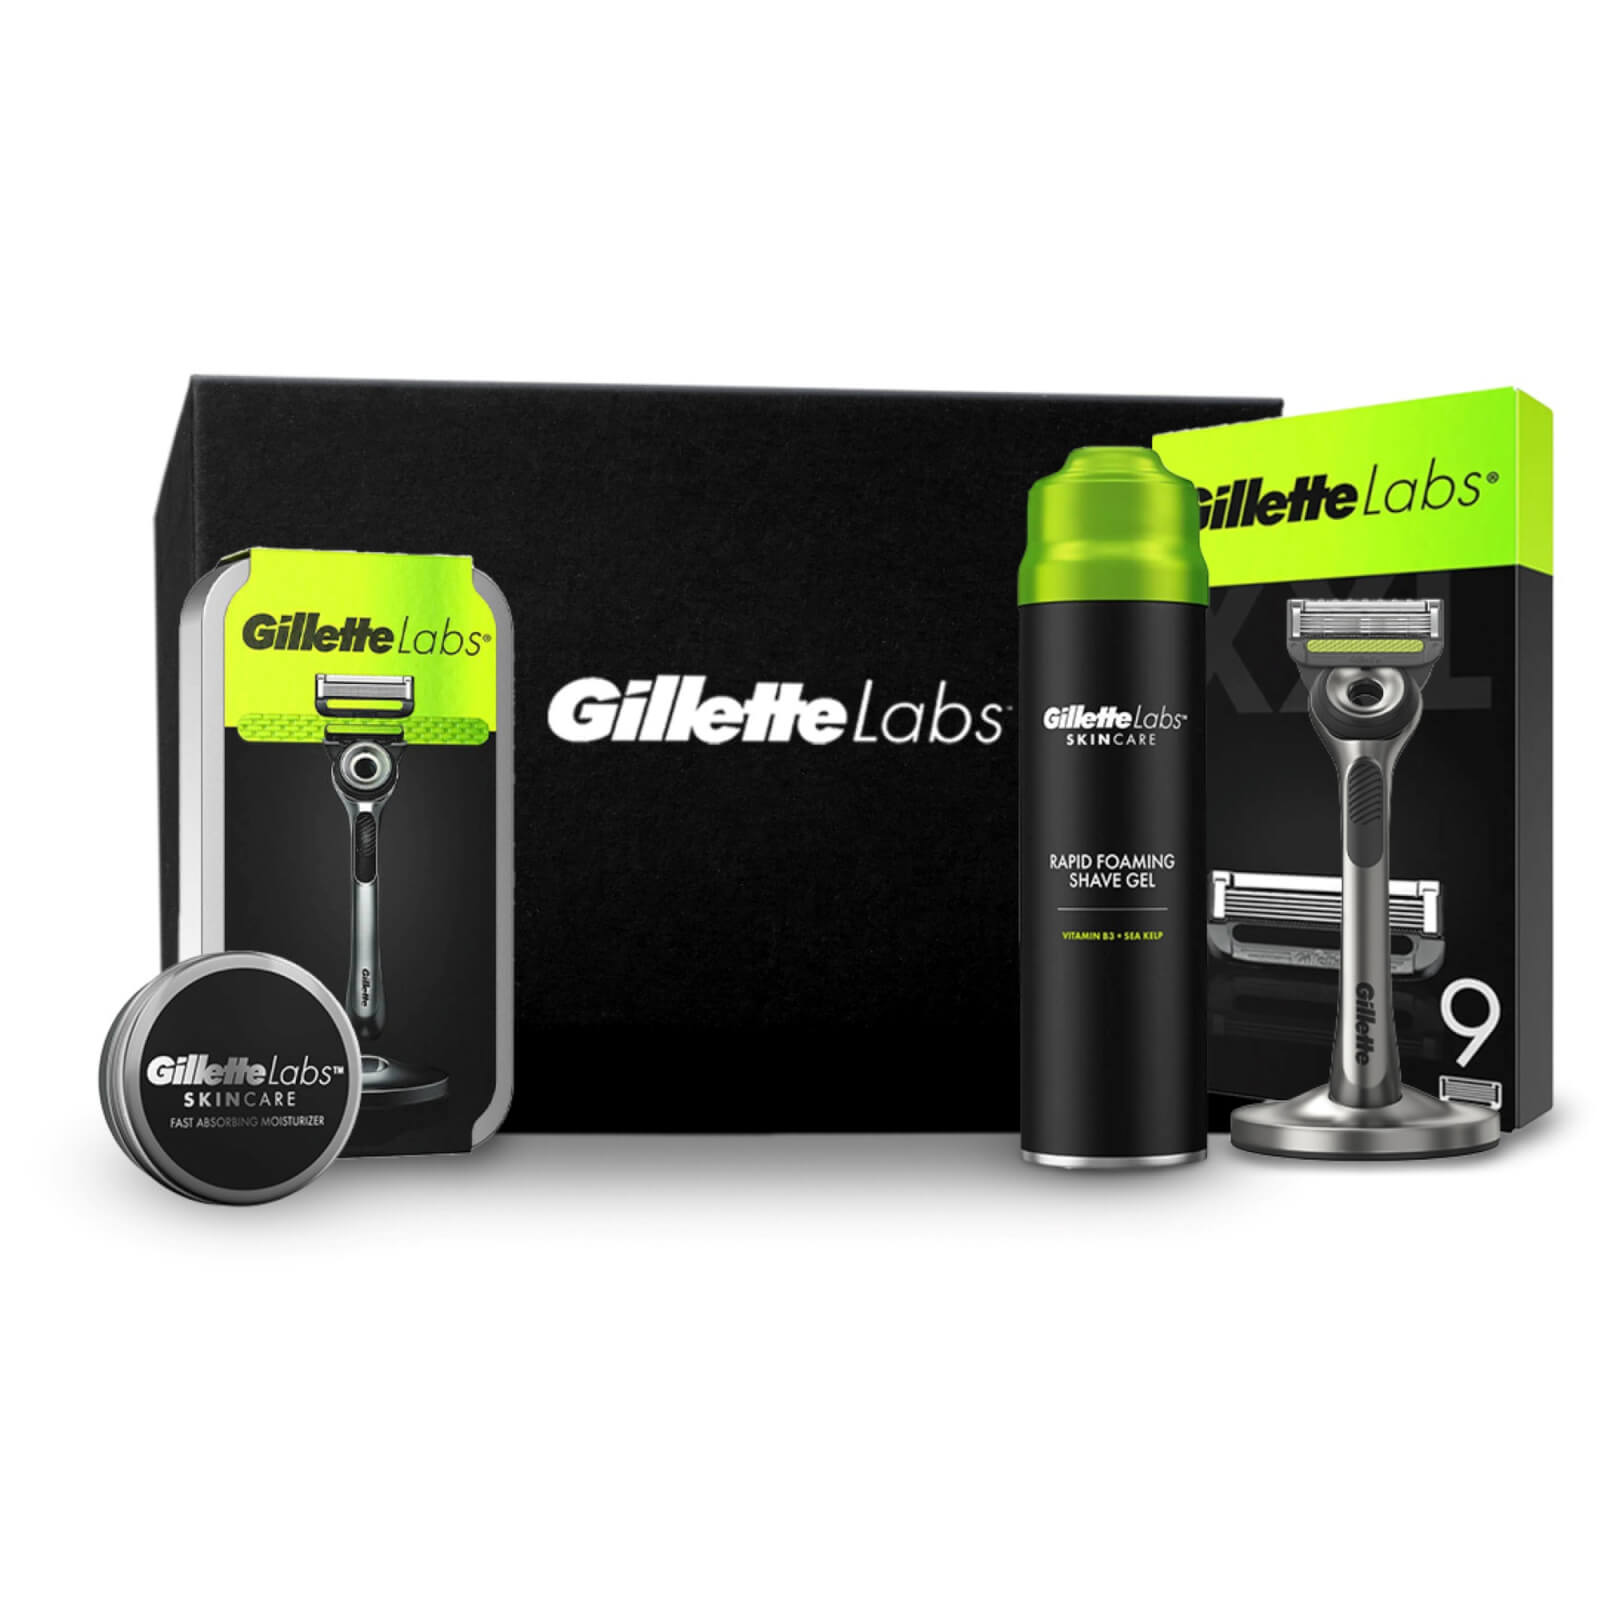 Gillette Labs Giftset - The ultimate shave regime DELUXE